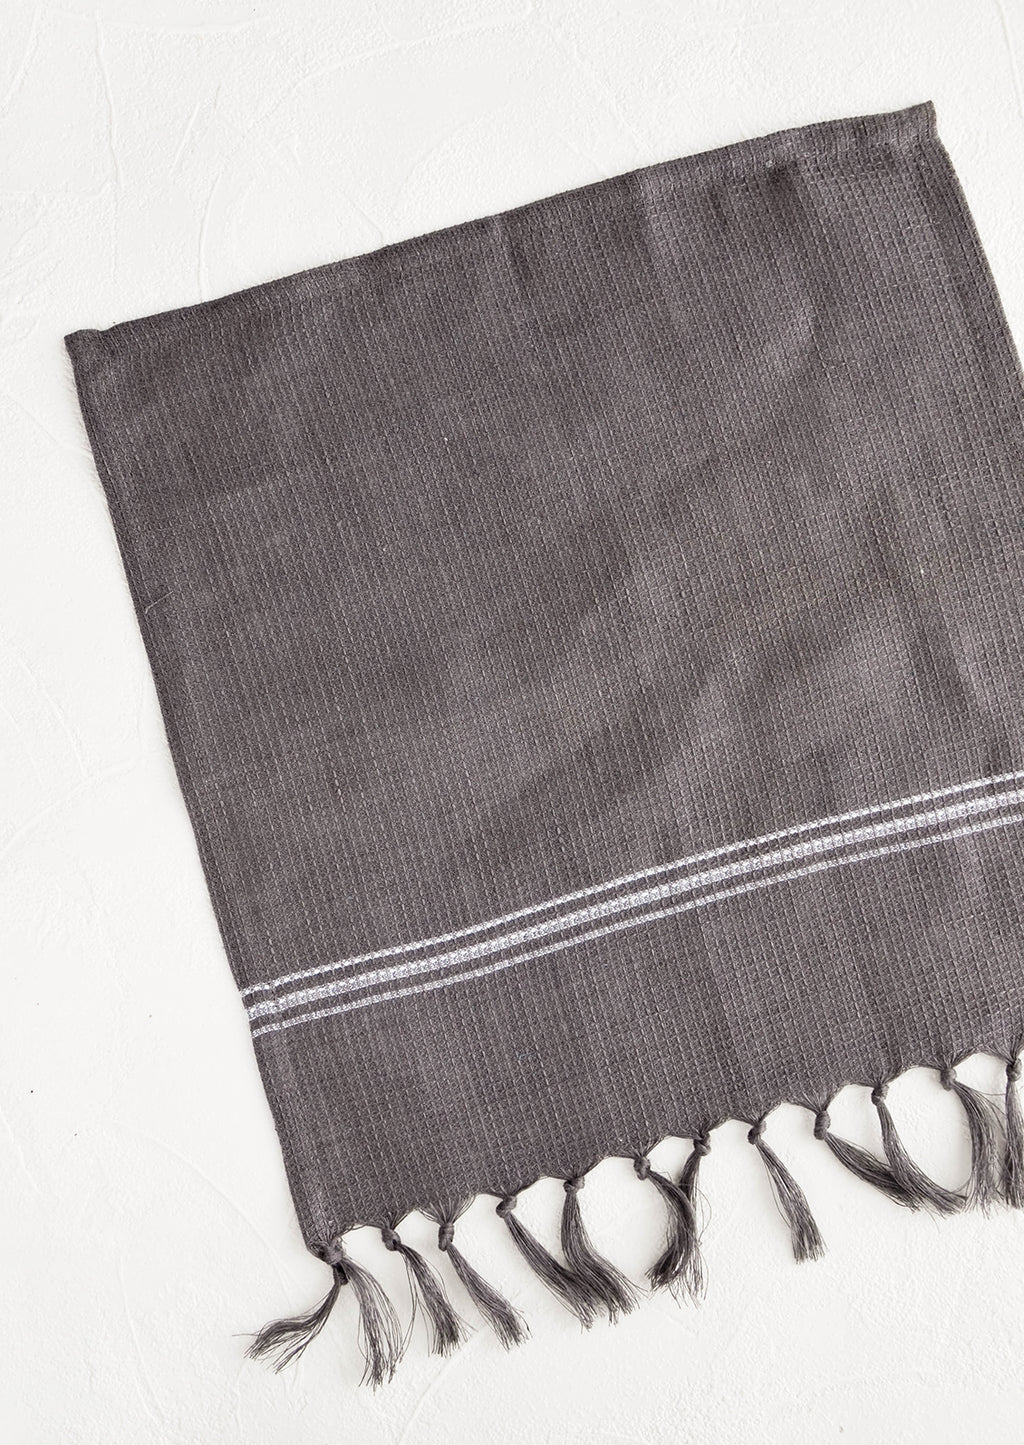 Charcoal: Waffle-textured dishcloths in charcoal color with single white stripe detail and tassel trim